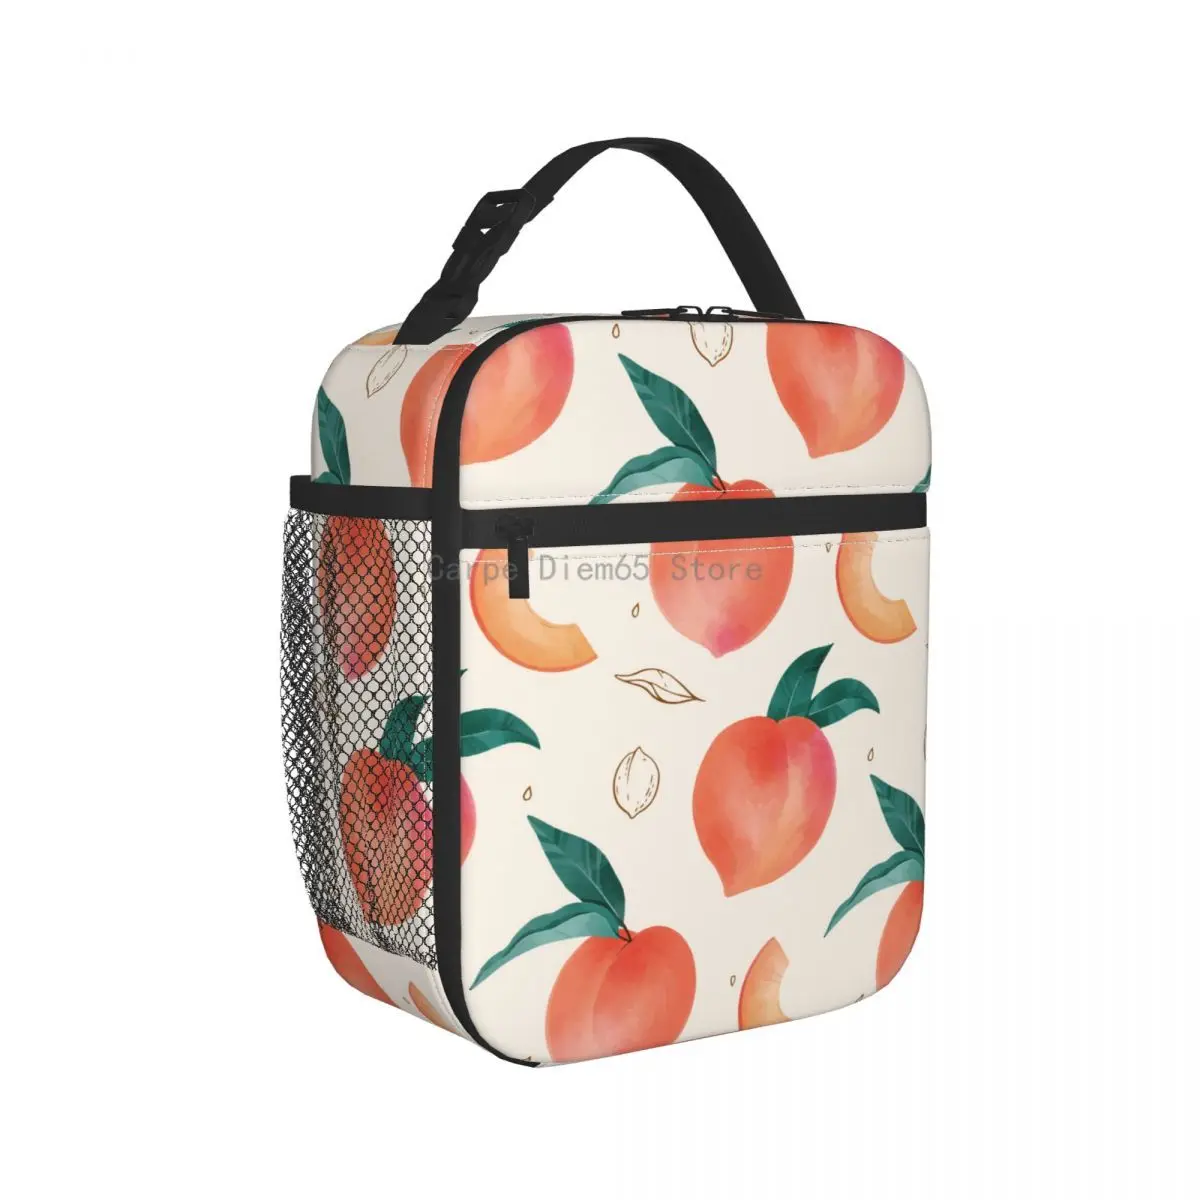 

Cooler Lunch Bag Watercolor Peach And Leaves Insulated Thermal Food Picnic Handbag Portable Shoulder Lunch Box Tote